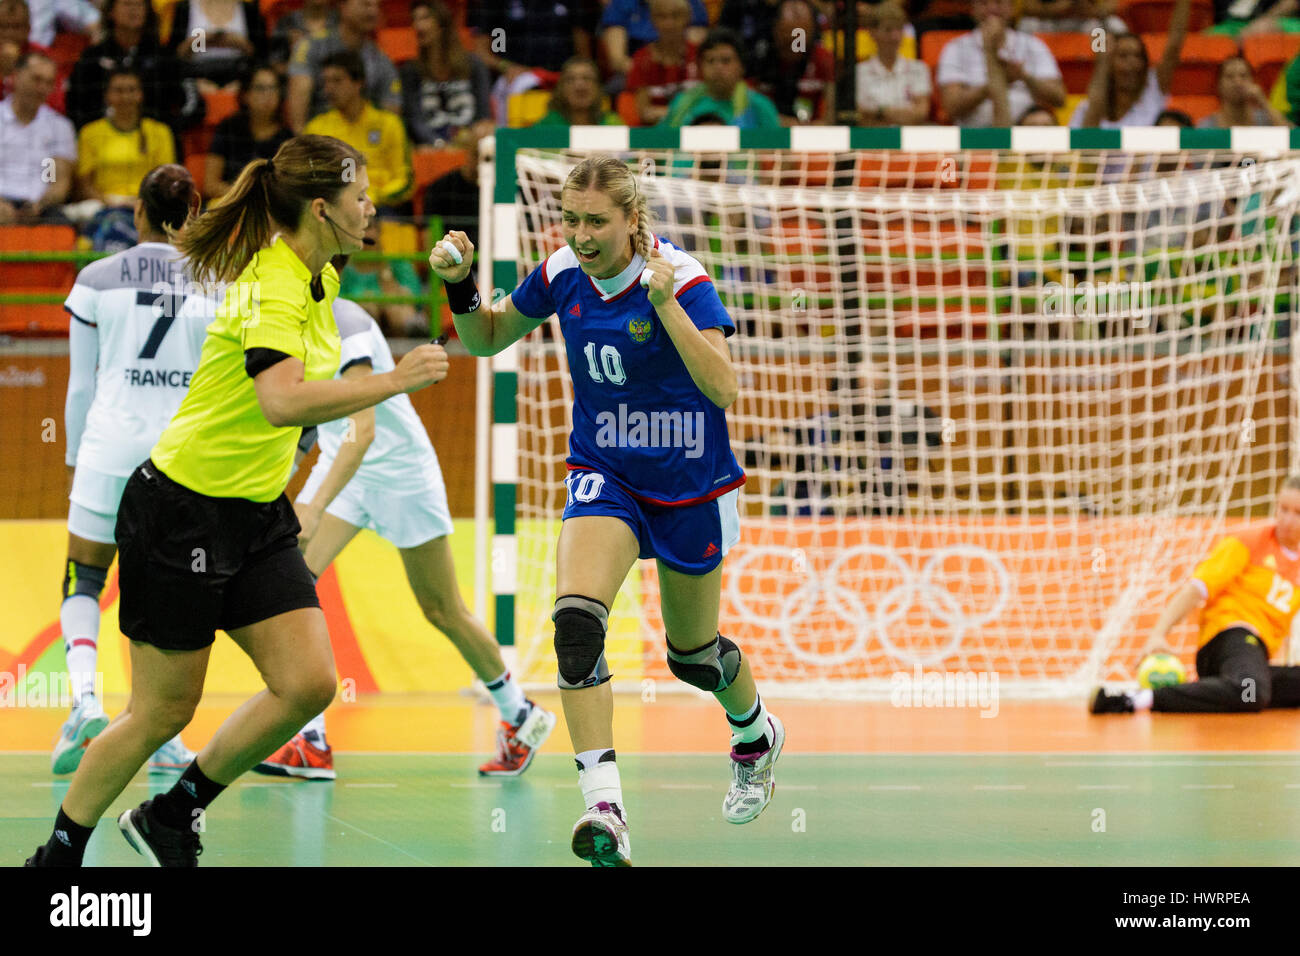 Rio de Janeiro, Brazil. 20 August 2016  Olga Akopian (RUS) #10 competes in the women's handball gold medal match Russia vs. France at the 2016 Olympic Stock Photo